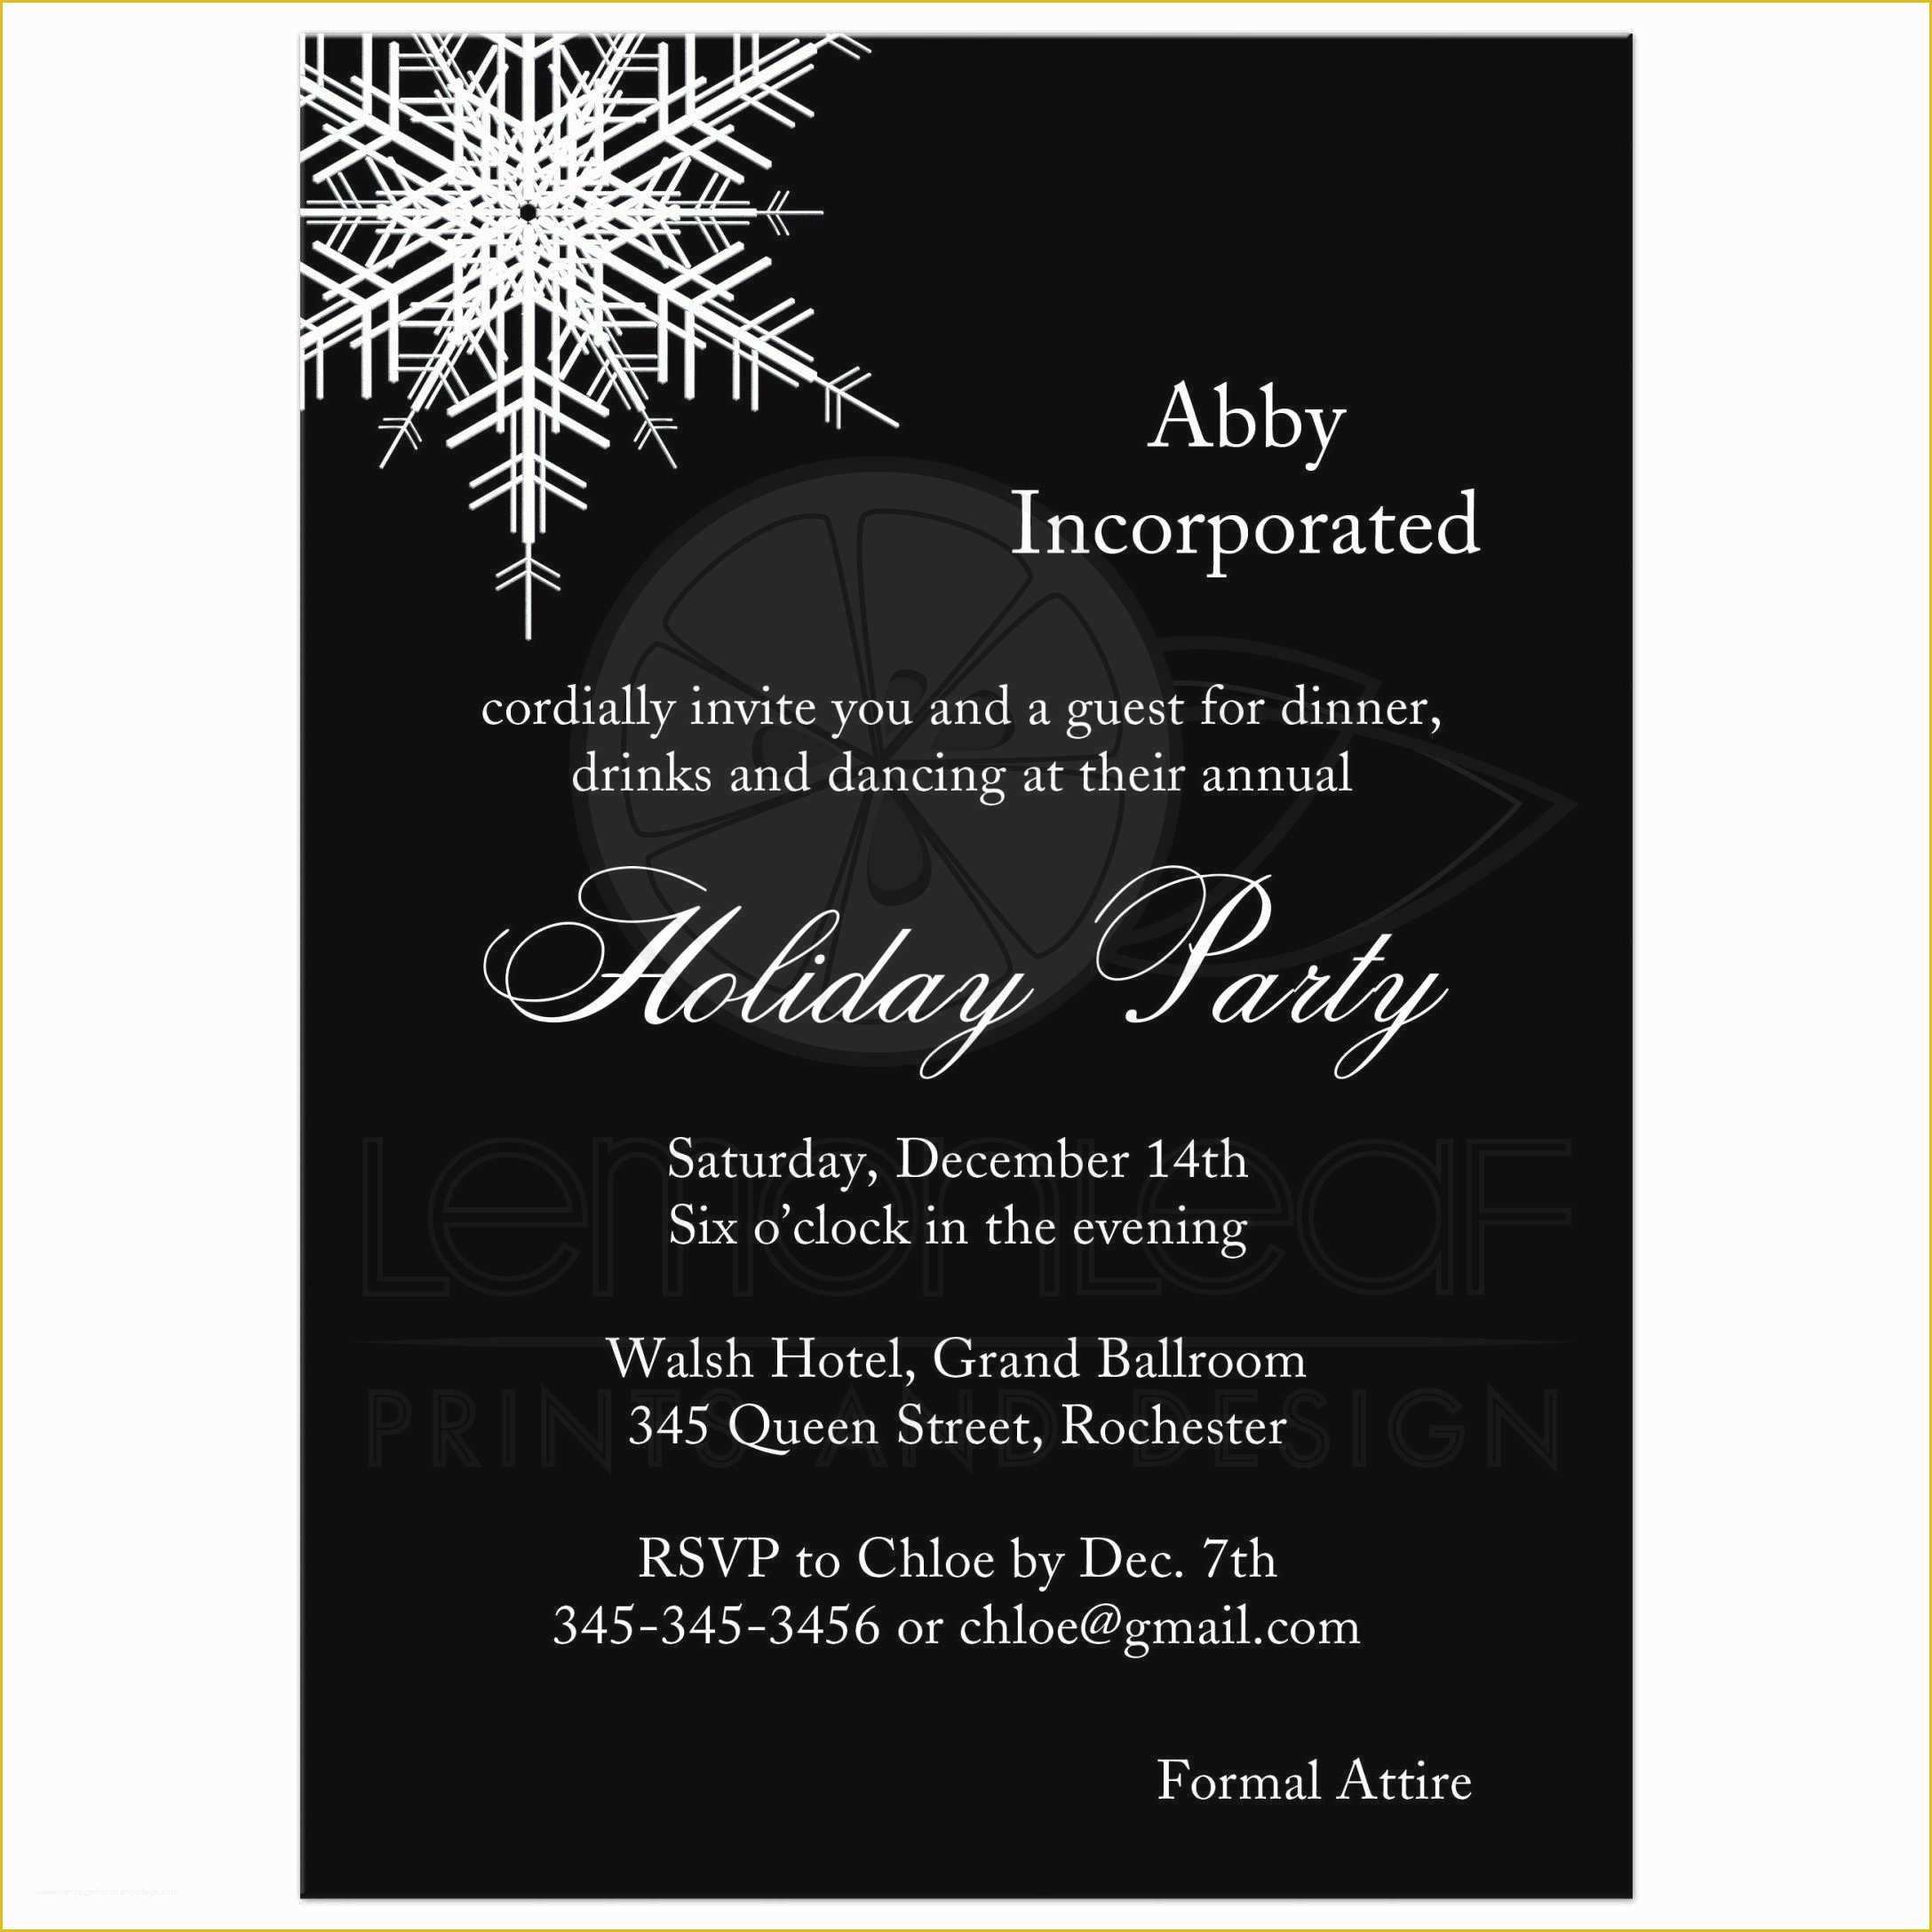 Christmas Email Invitations Templates Free Of Awesome Free Holiday Email Invitation Templates